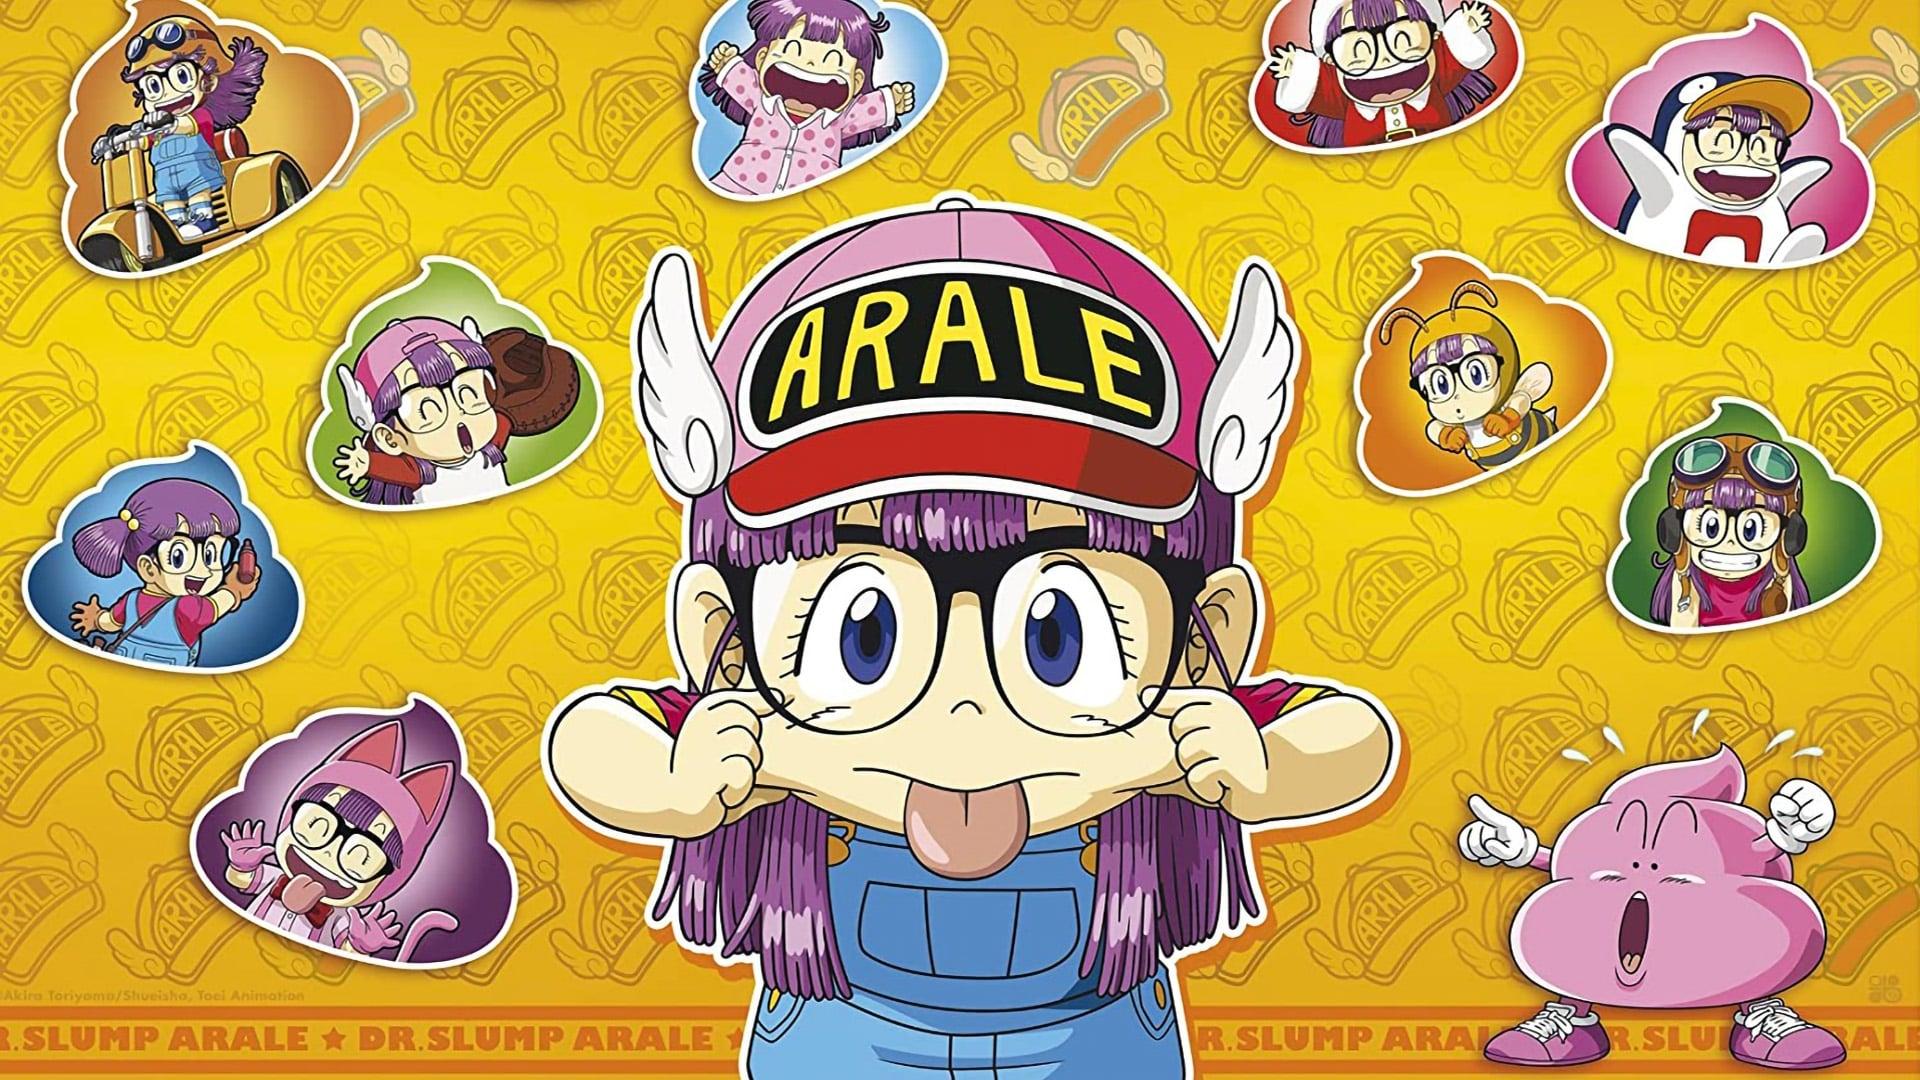 Dr. Slump and Arale-chan: N-cha! Clear Skies Over Penguin Village backdrop